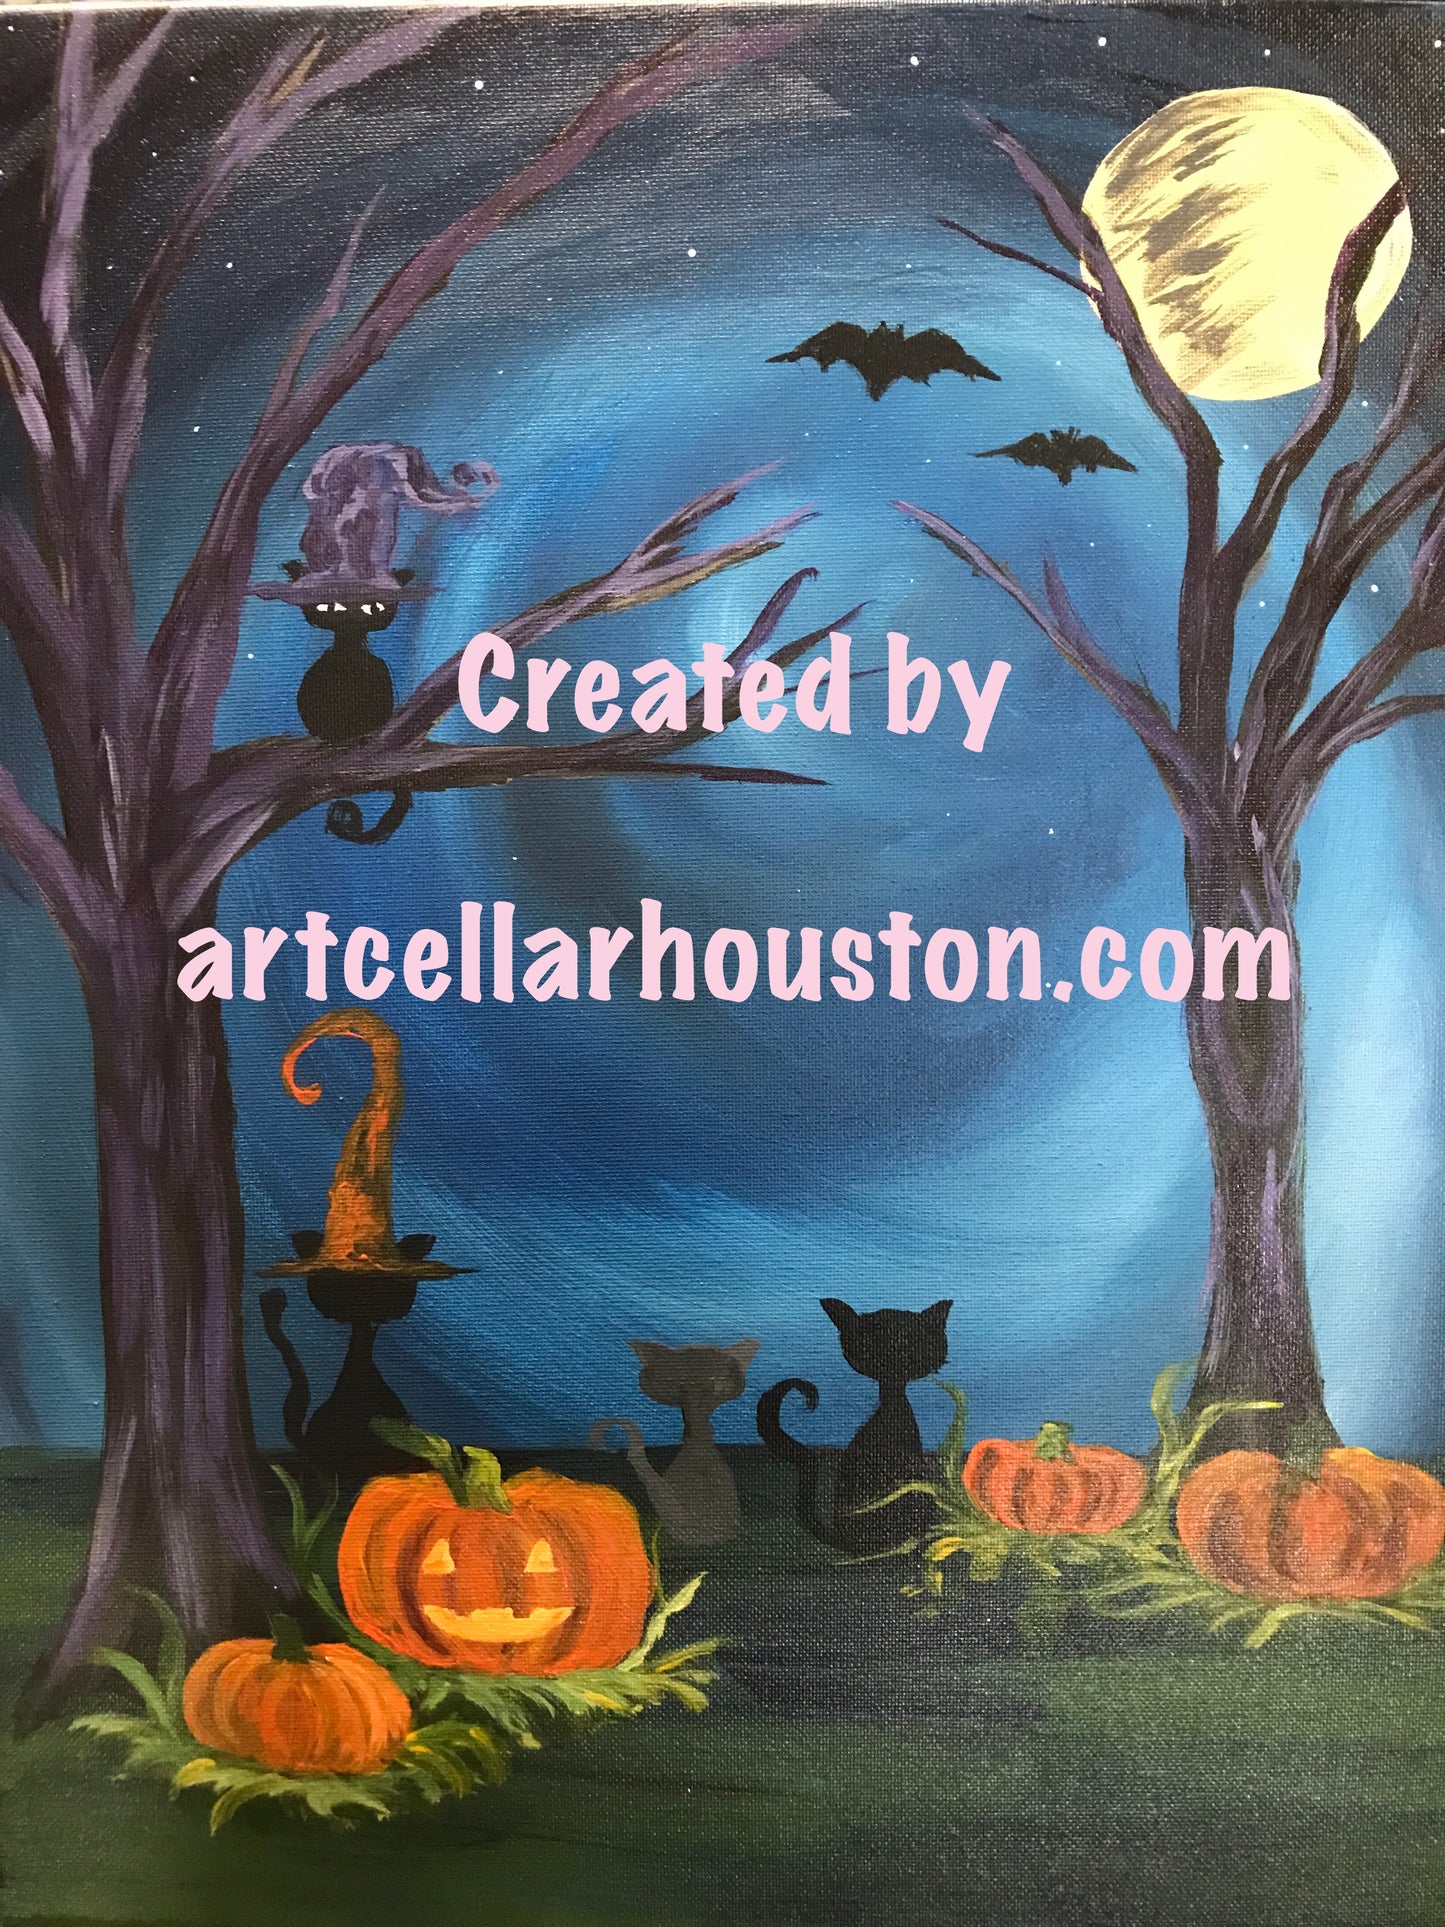 Wed, Oct 11th, 4-6P Kids Paint “Haunted Woods” Public Houston Painting Class